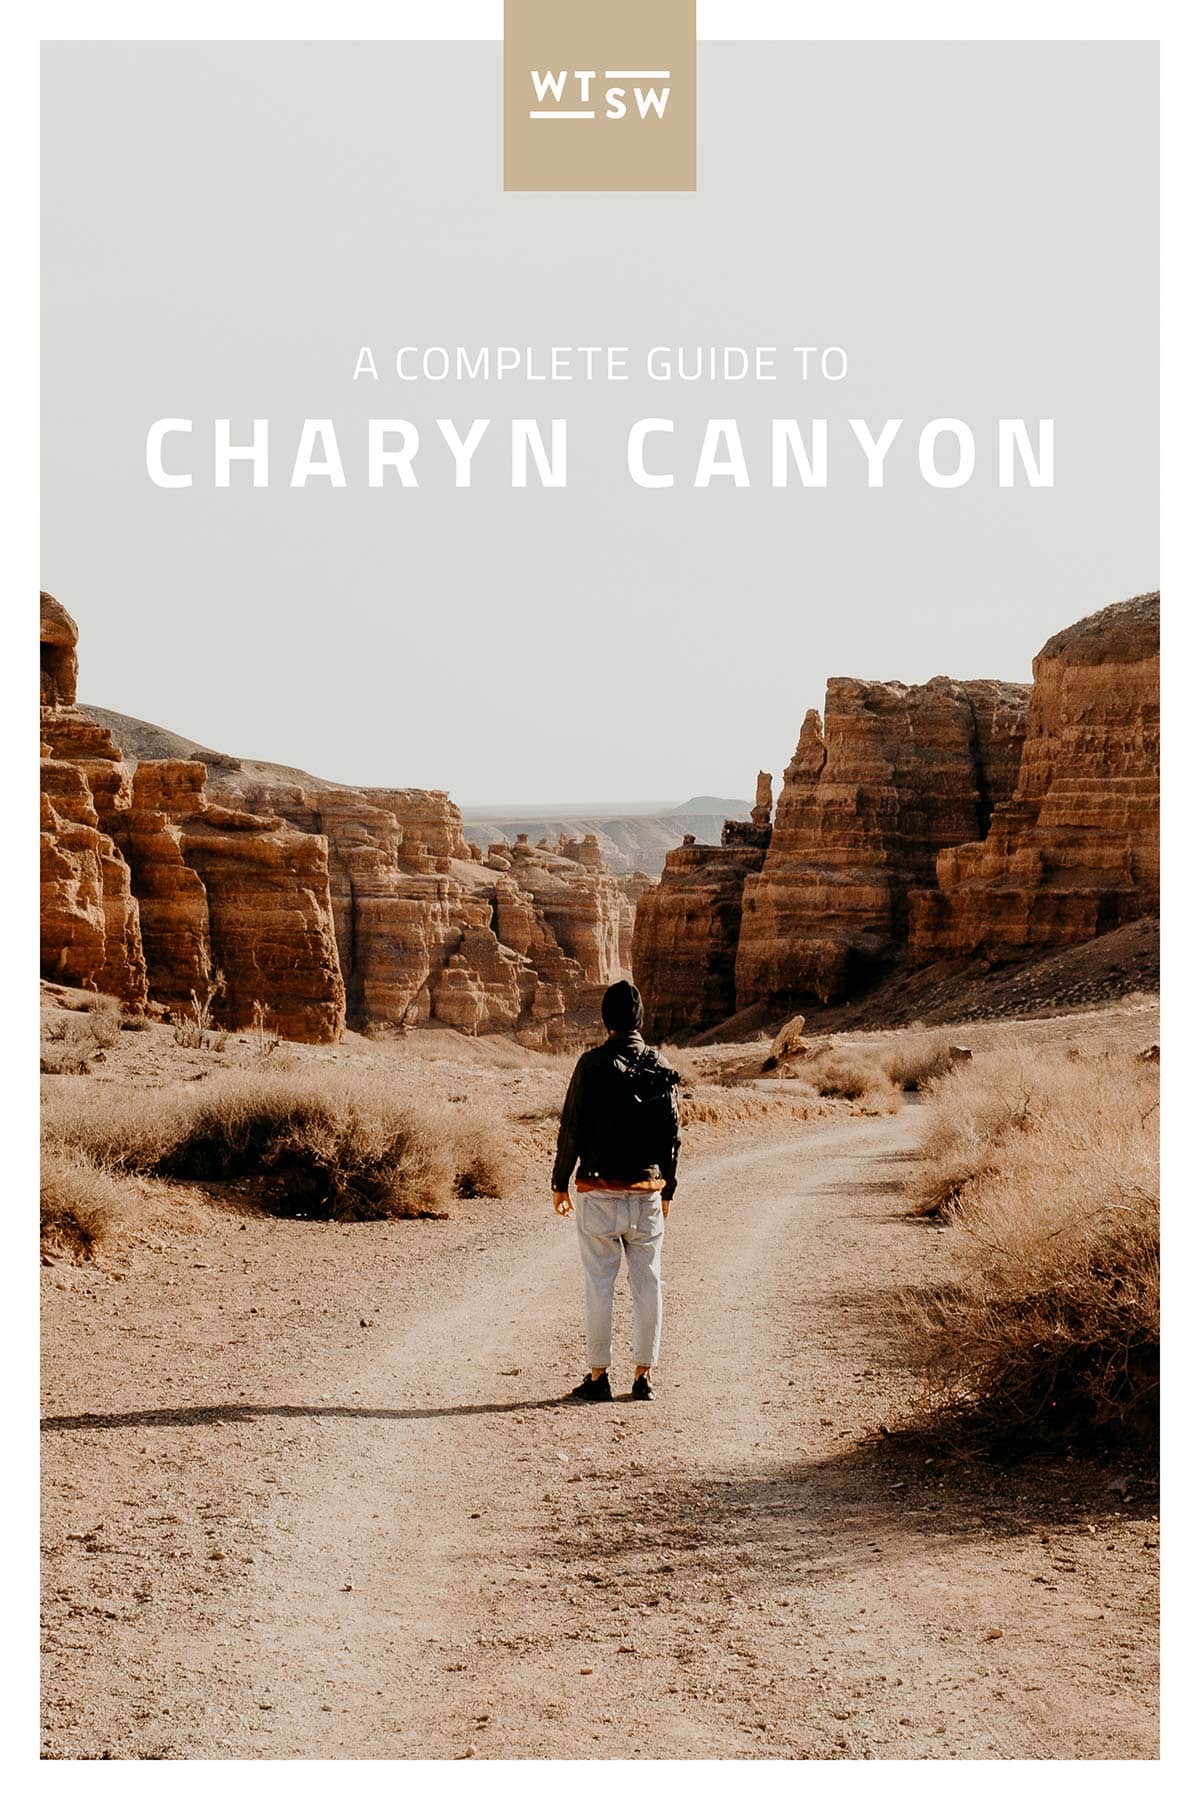 A guide to Charyn Canyon